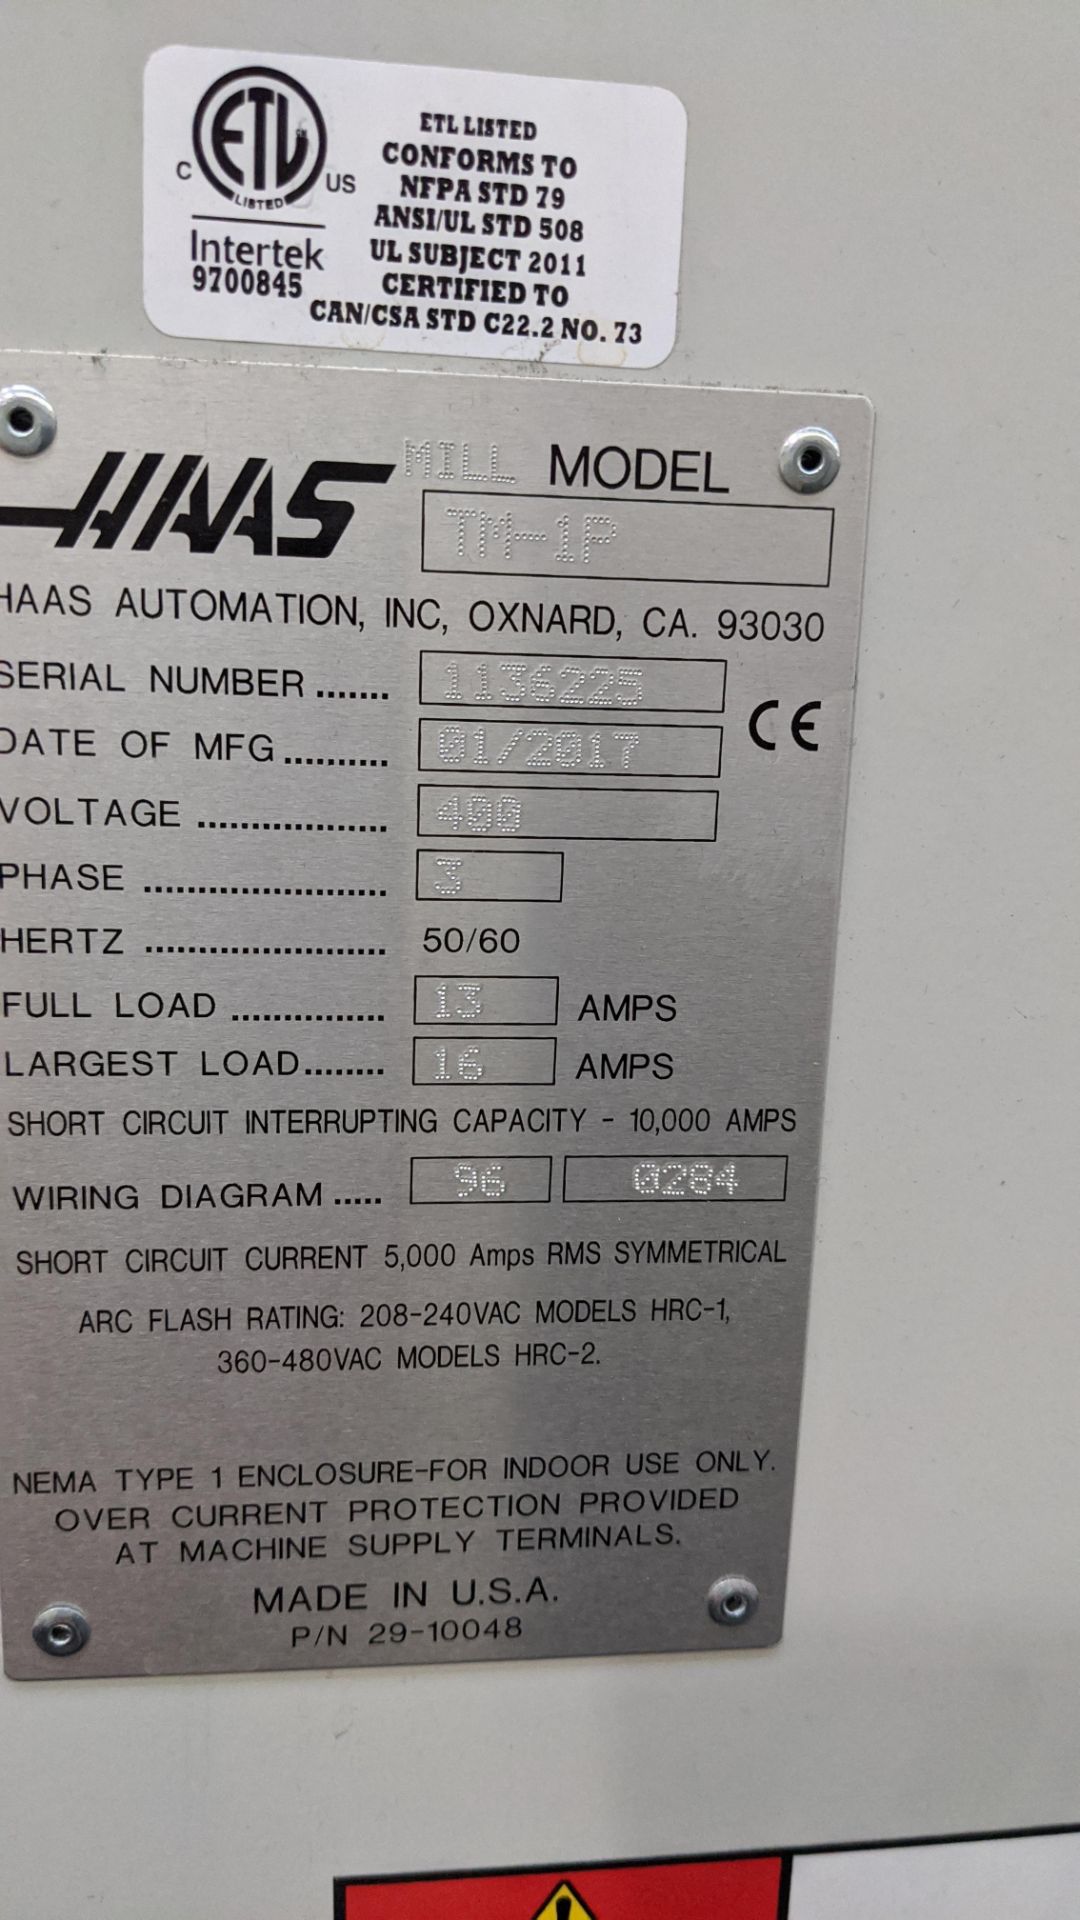 2017 Haas model TM-1P CNC machining centre, serial no. 1136225. Incorporating swing-out controls. - Image 18 of 24